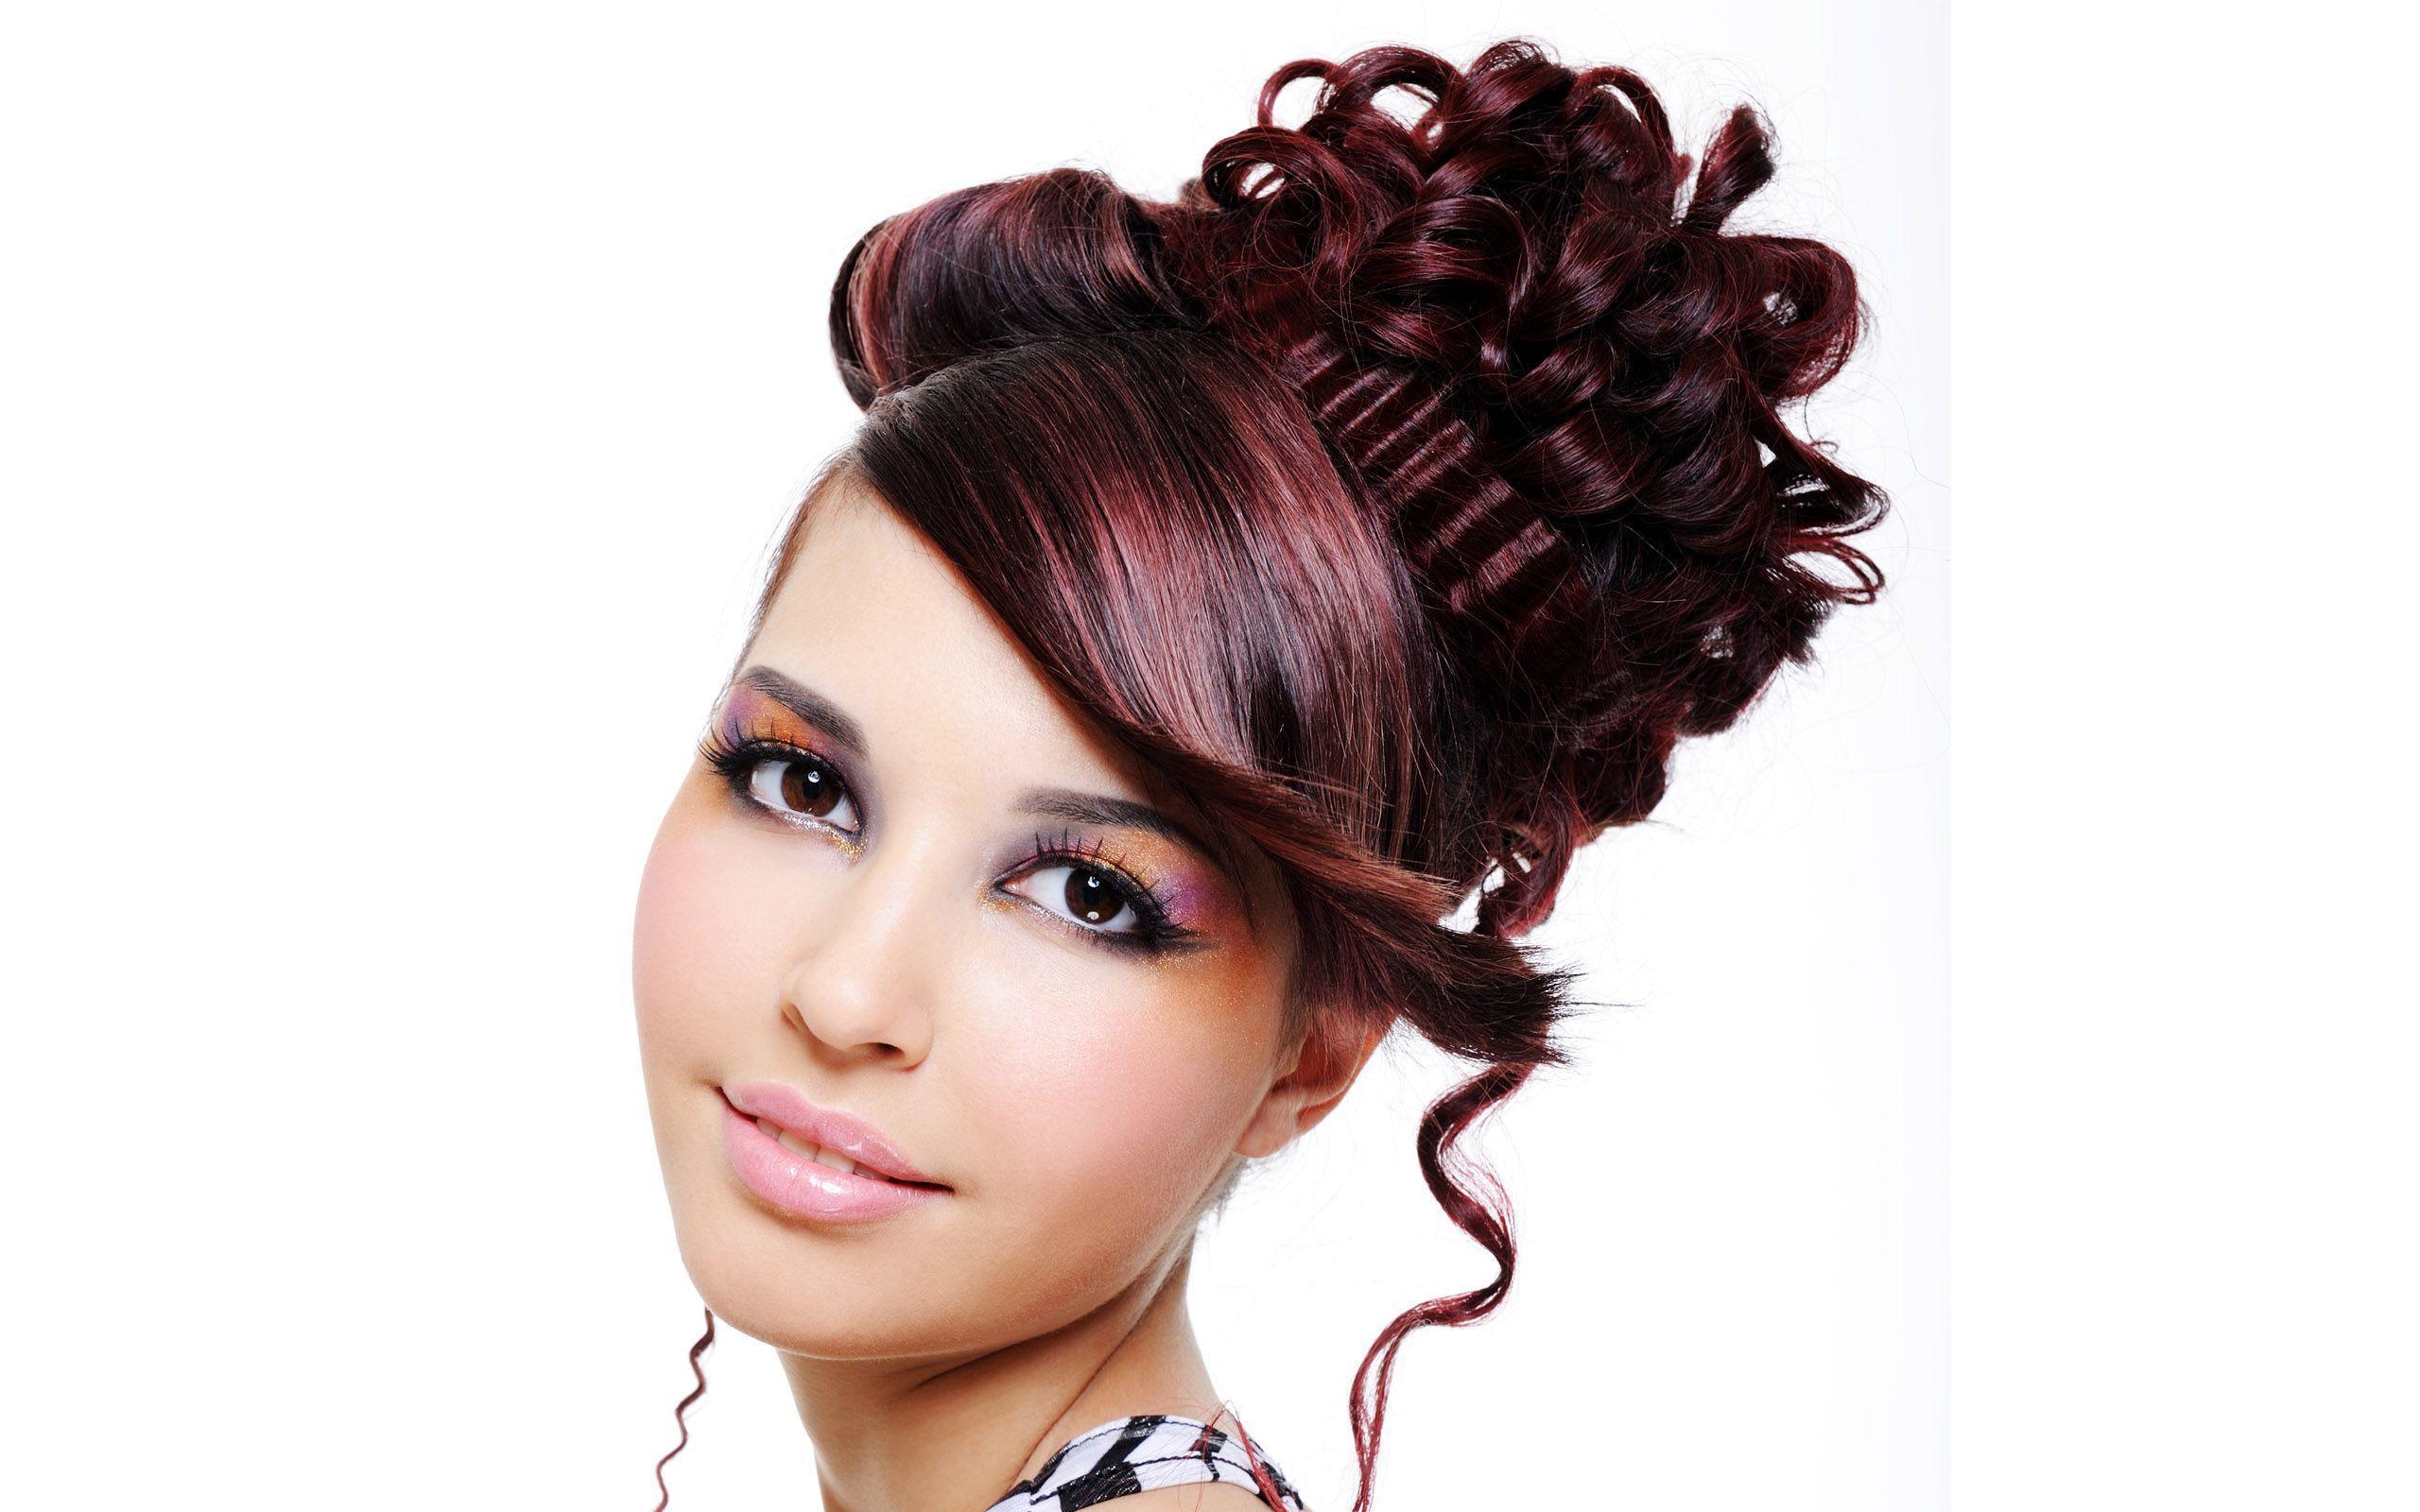 Hair Styles Wallpapers - Wallpaper Cave